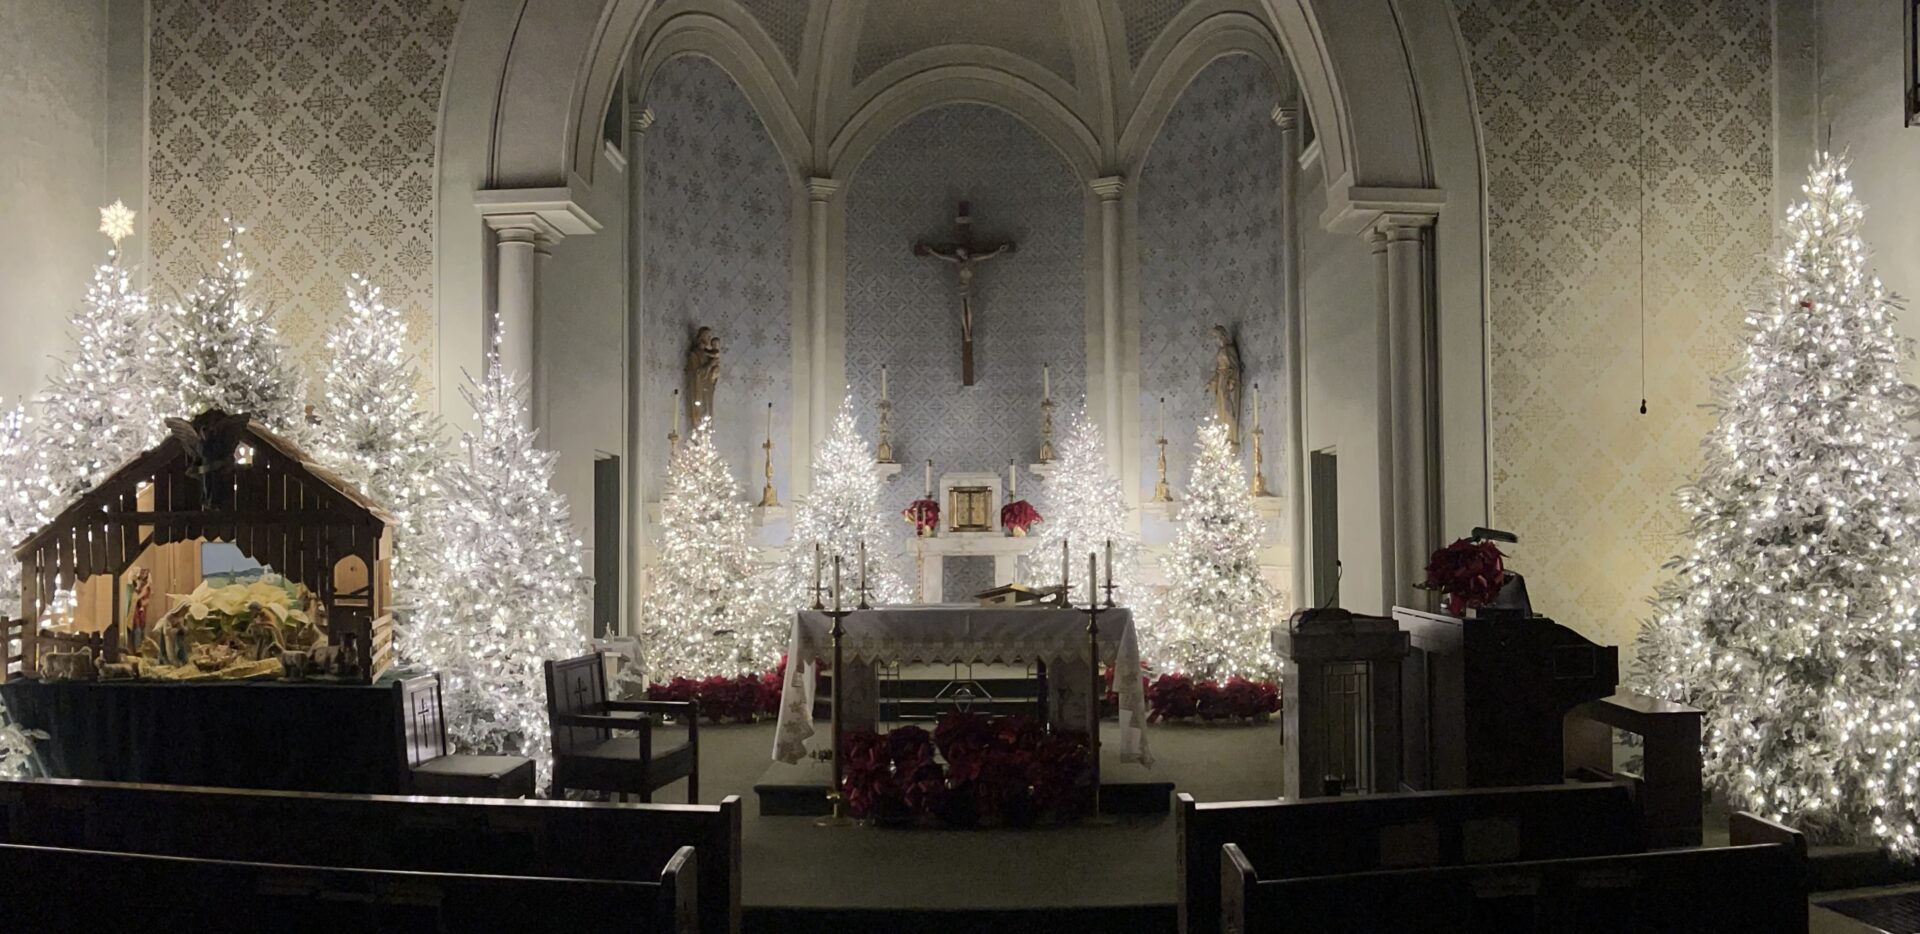 A church with christmas trees and lights in the center.